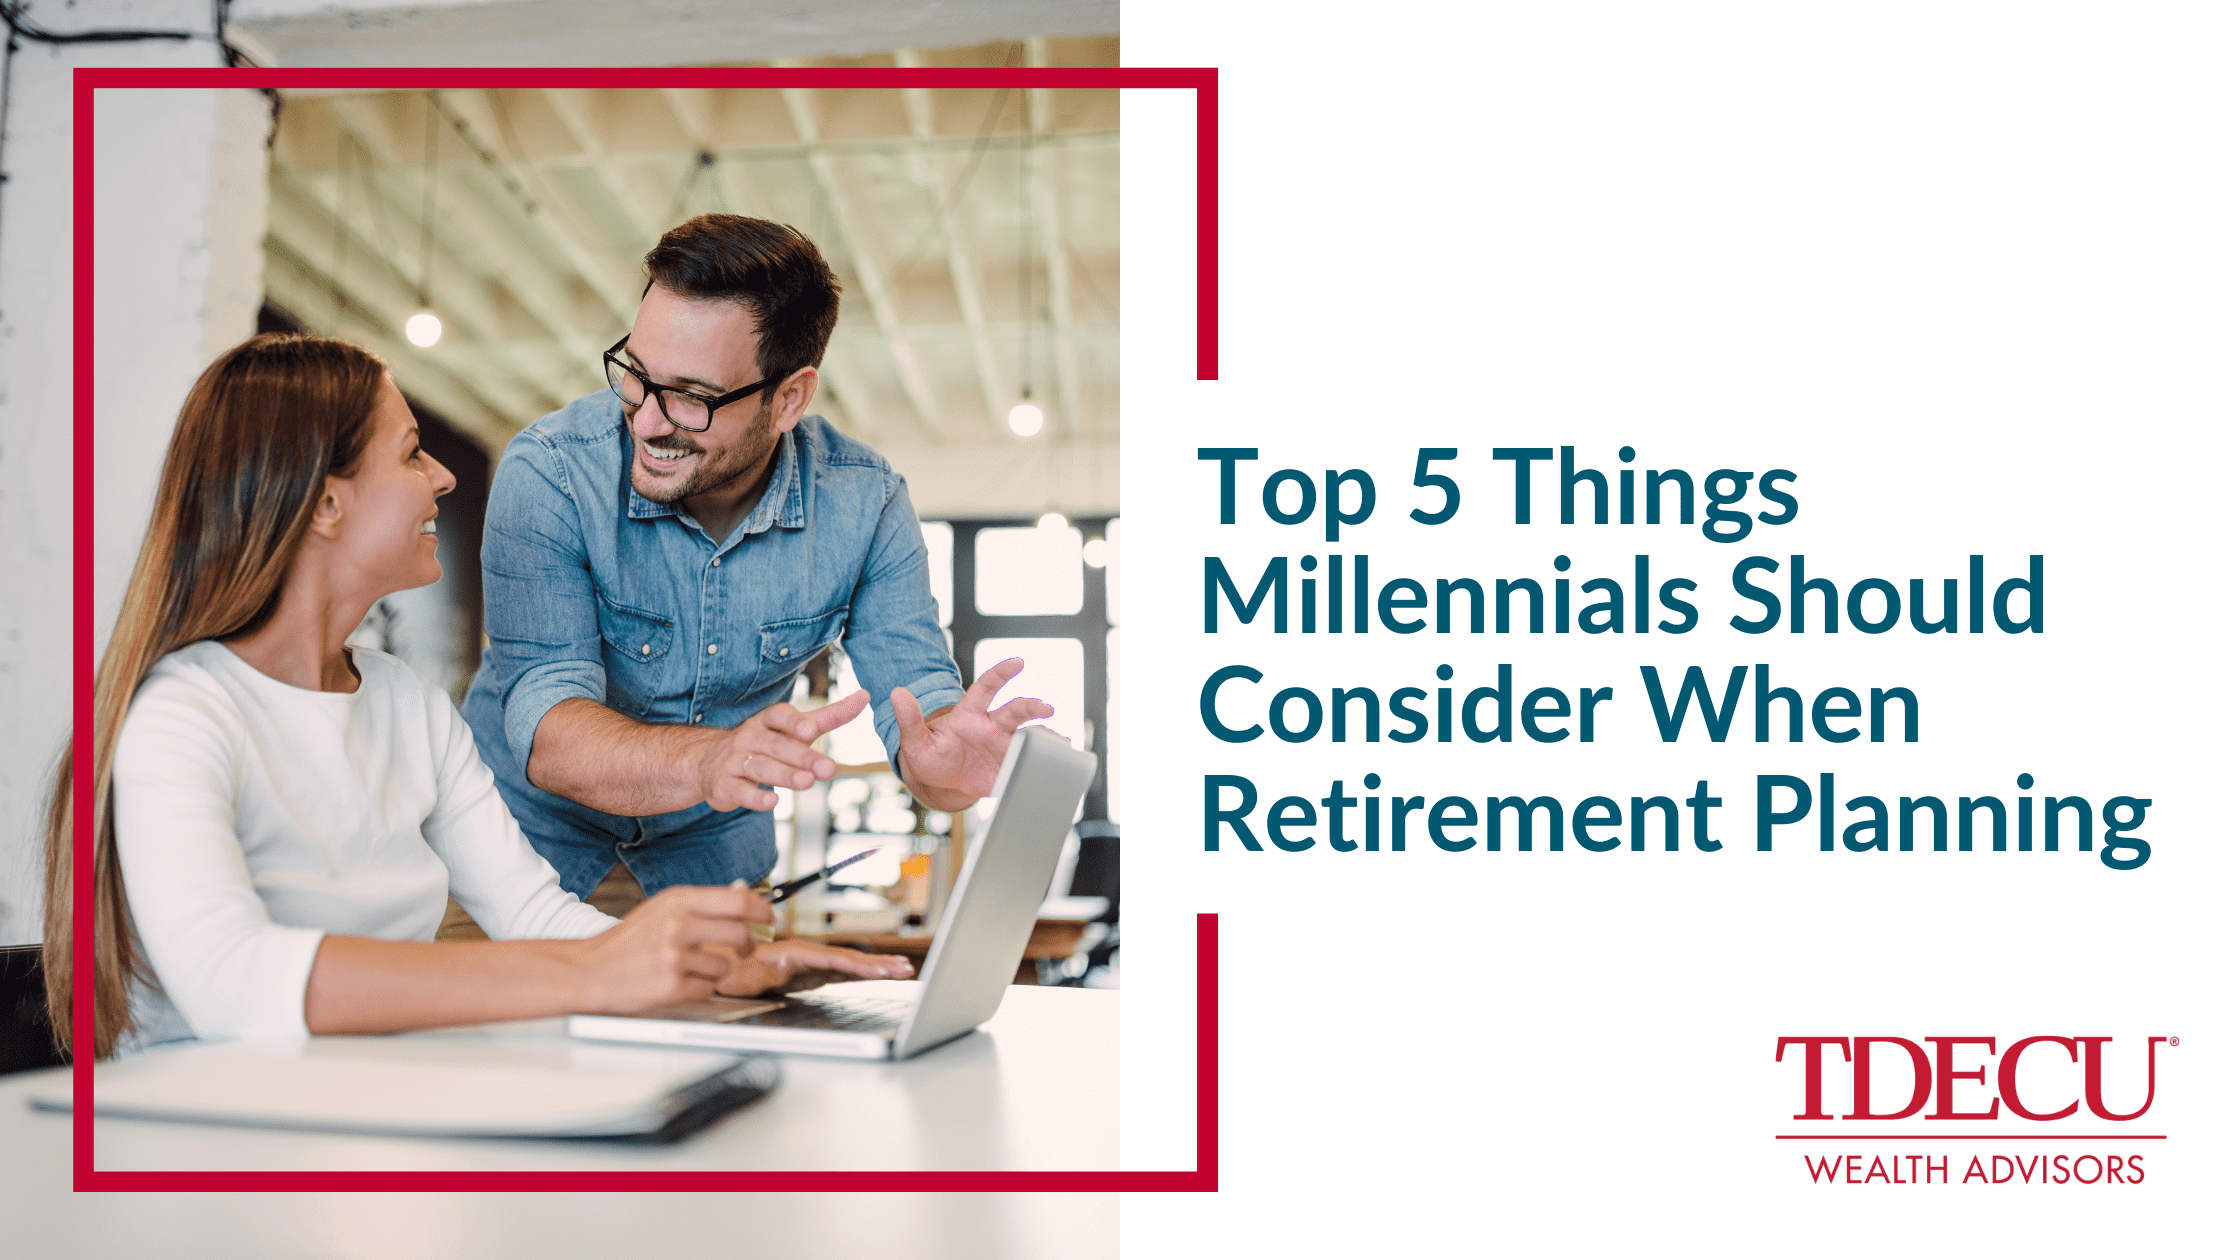 Top 5 Things Millennials Should Consider When Retirement Planning